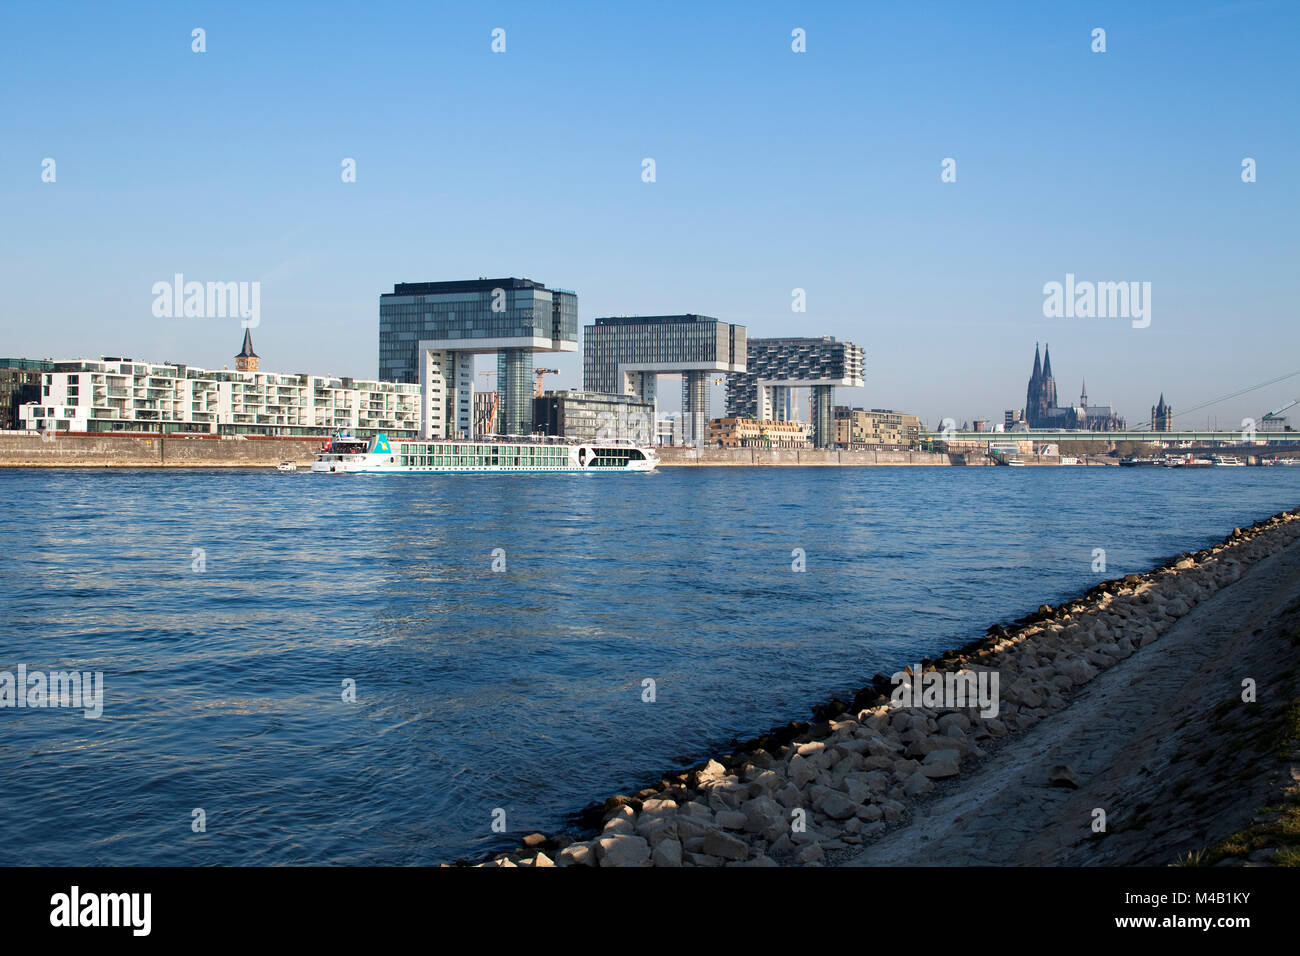 Urban development project in the old industrial harbour "Rheinauhafen" at the river Rhine in Cologne, Germany Stock Photo